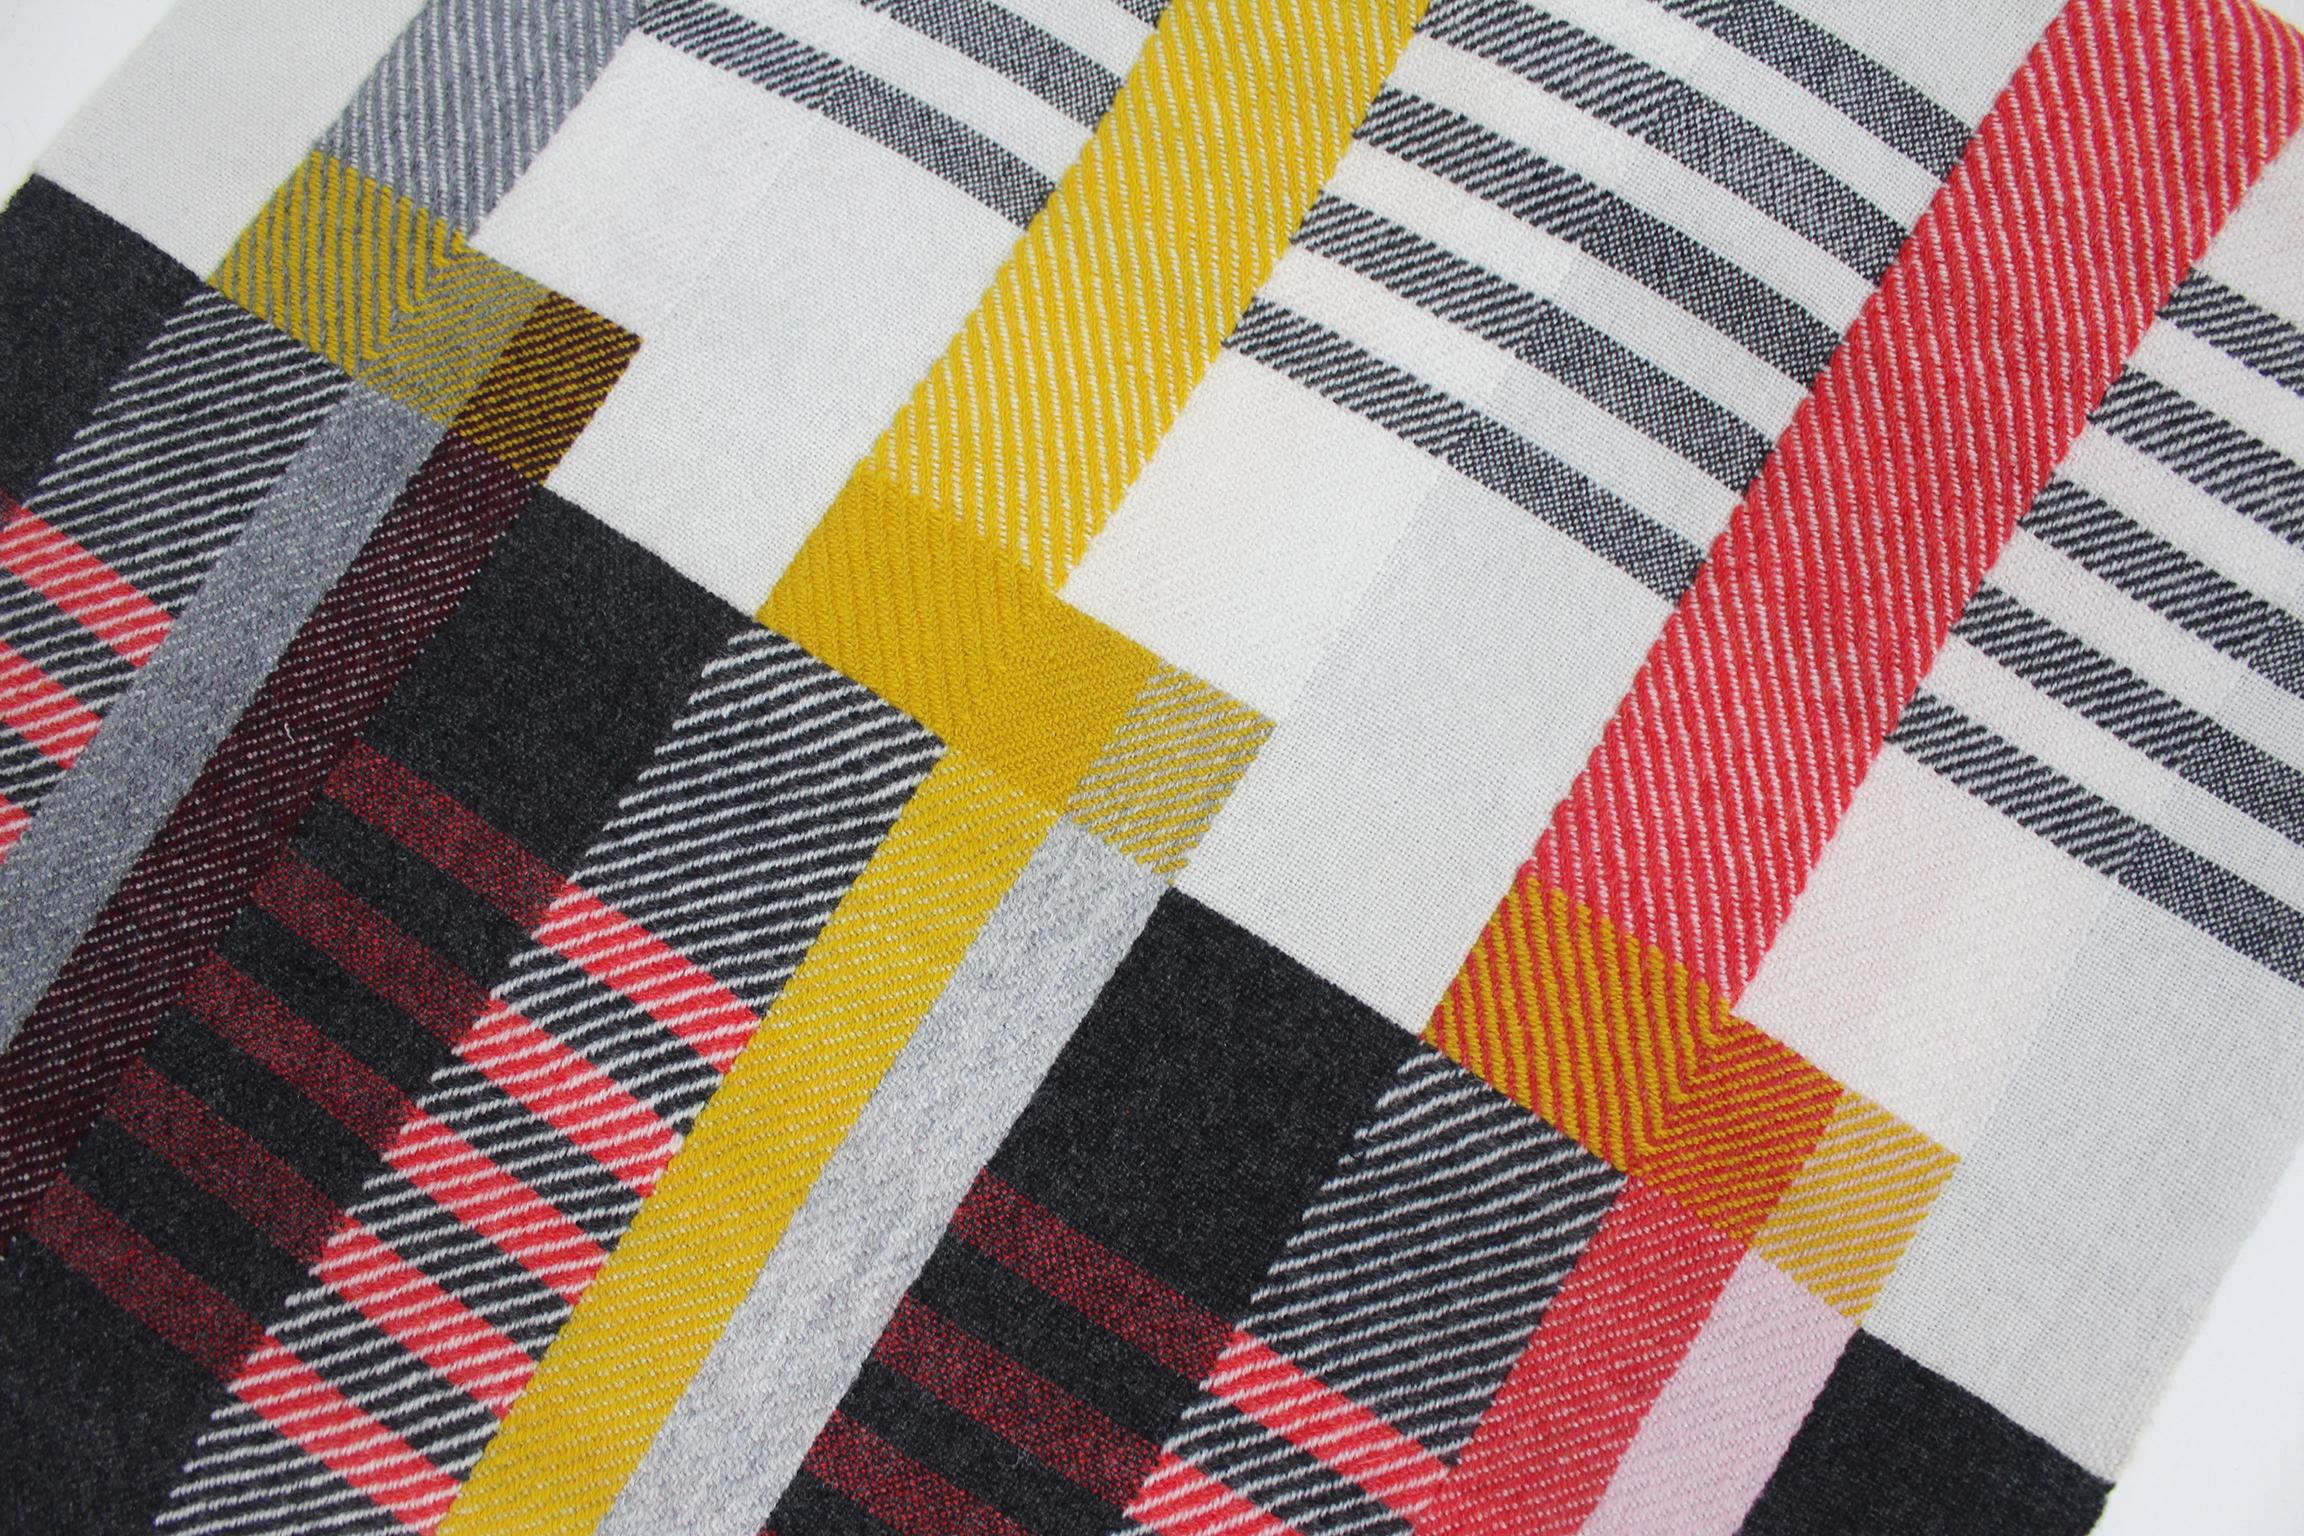 Handwoven 'Etterbeek' Bauhaus  Merino Wool Wall Hanging In New Condition For Sale In Chelmsford, GB